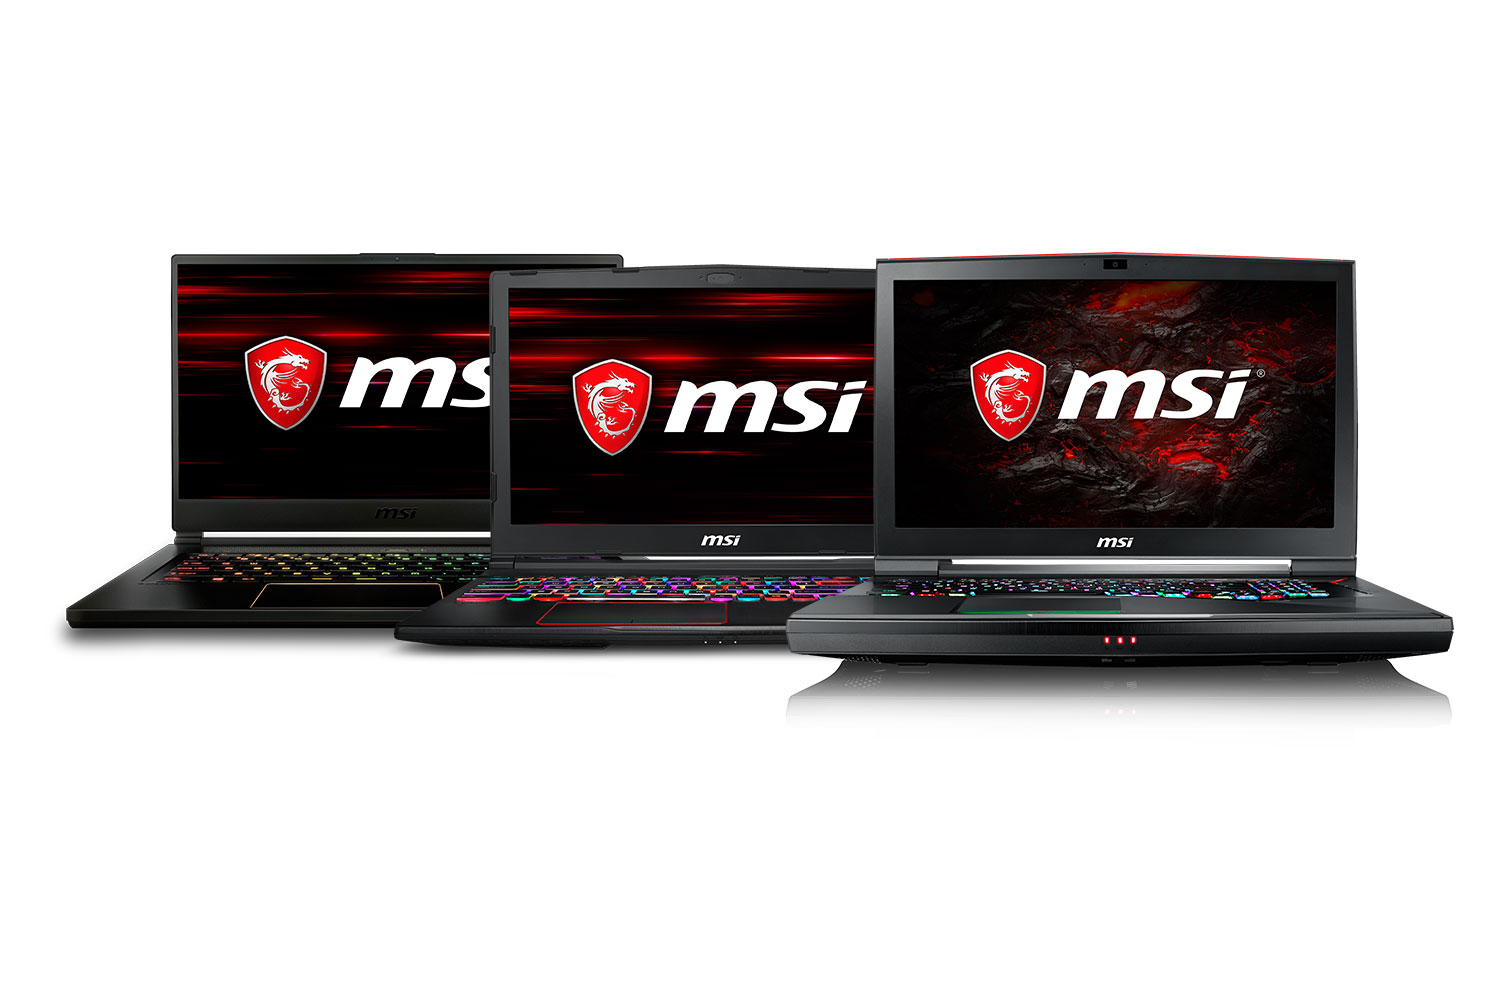 MSI Unveils Gaming Laptops with Intel 8th Gen Processors